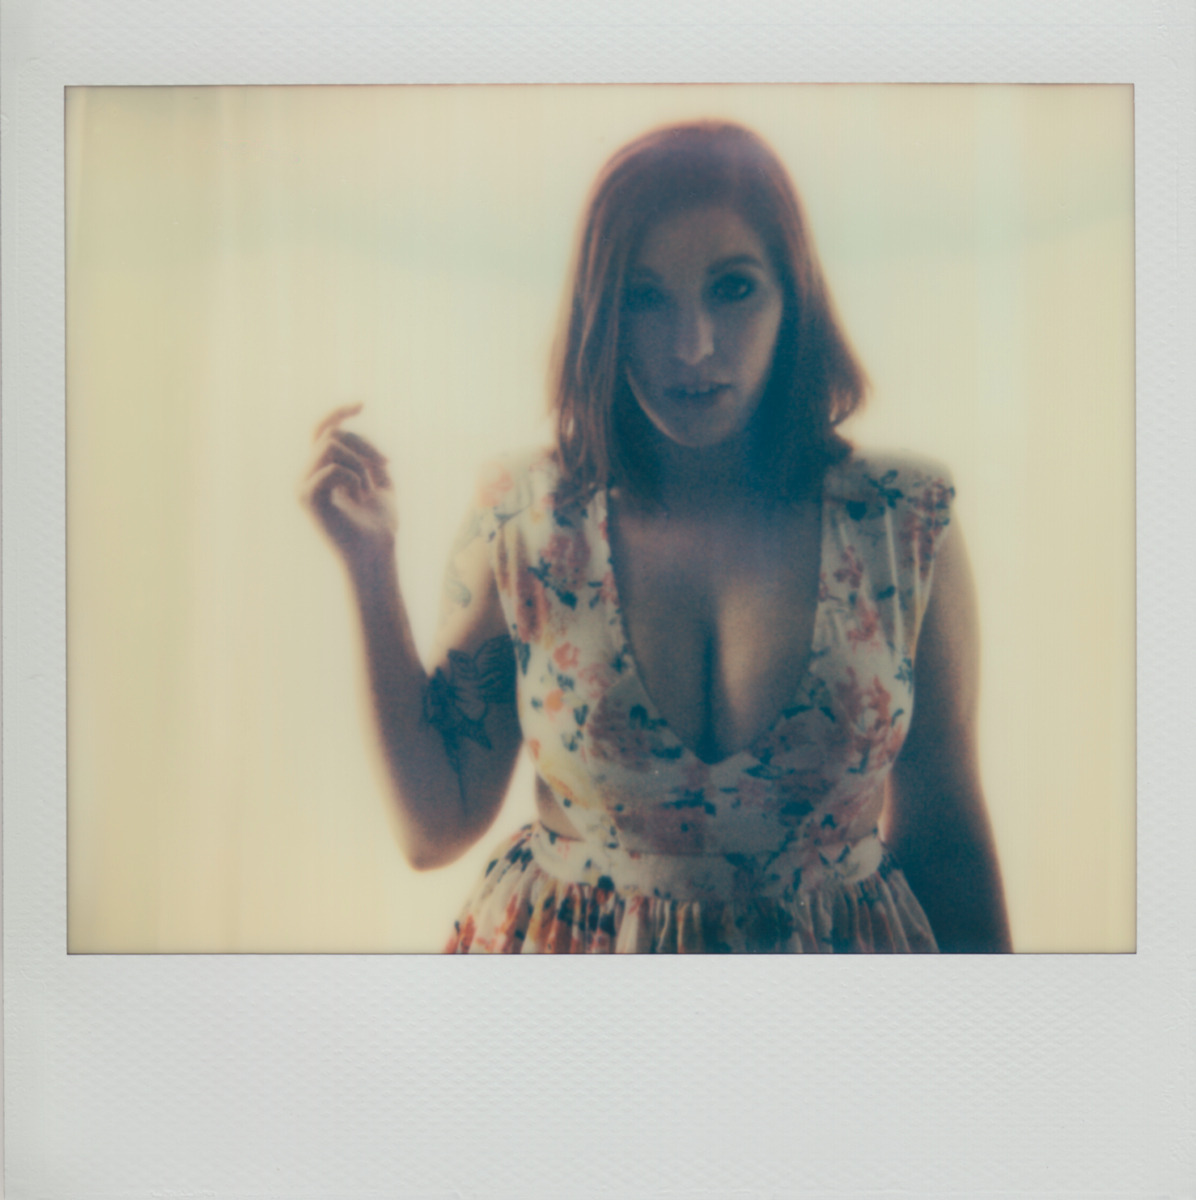 finchdown:  Eight original instant film shots of Selina Kyl are up for salehttp://finchlinden.com/impossible